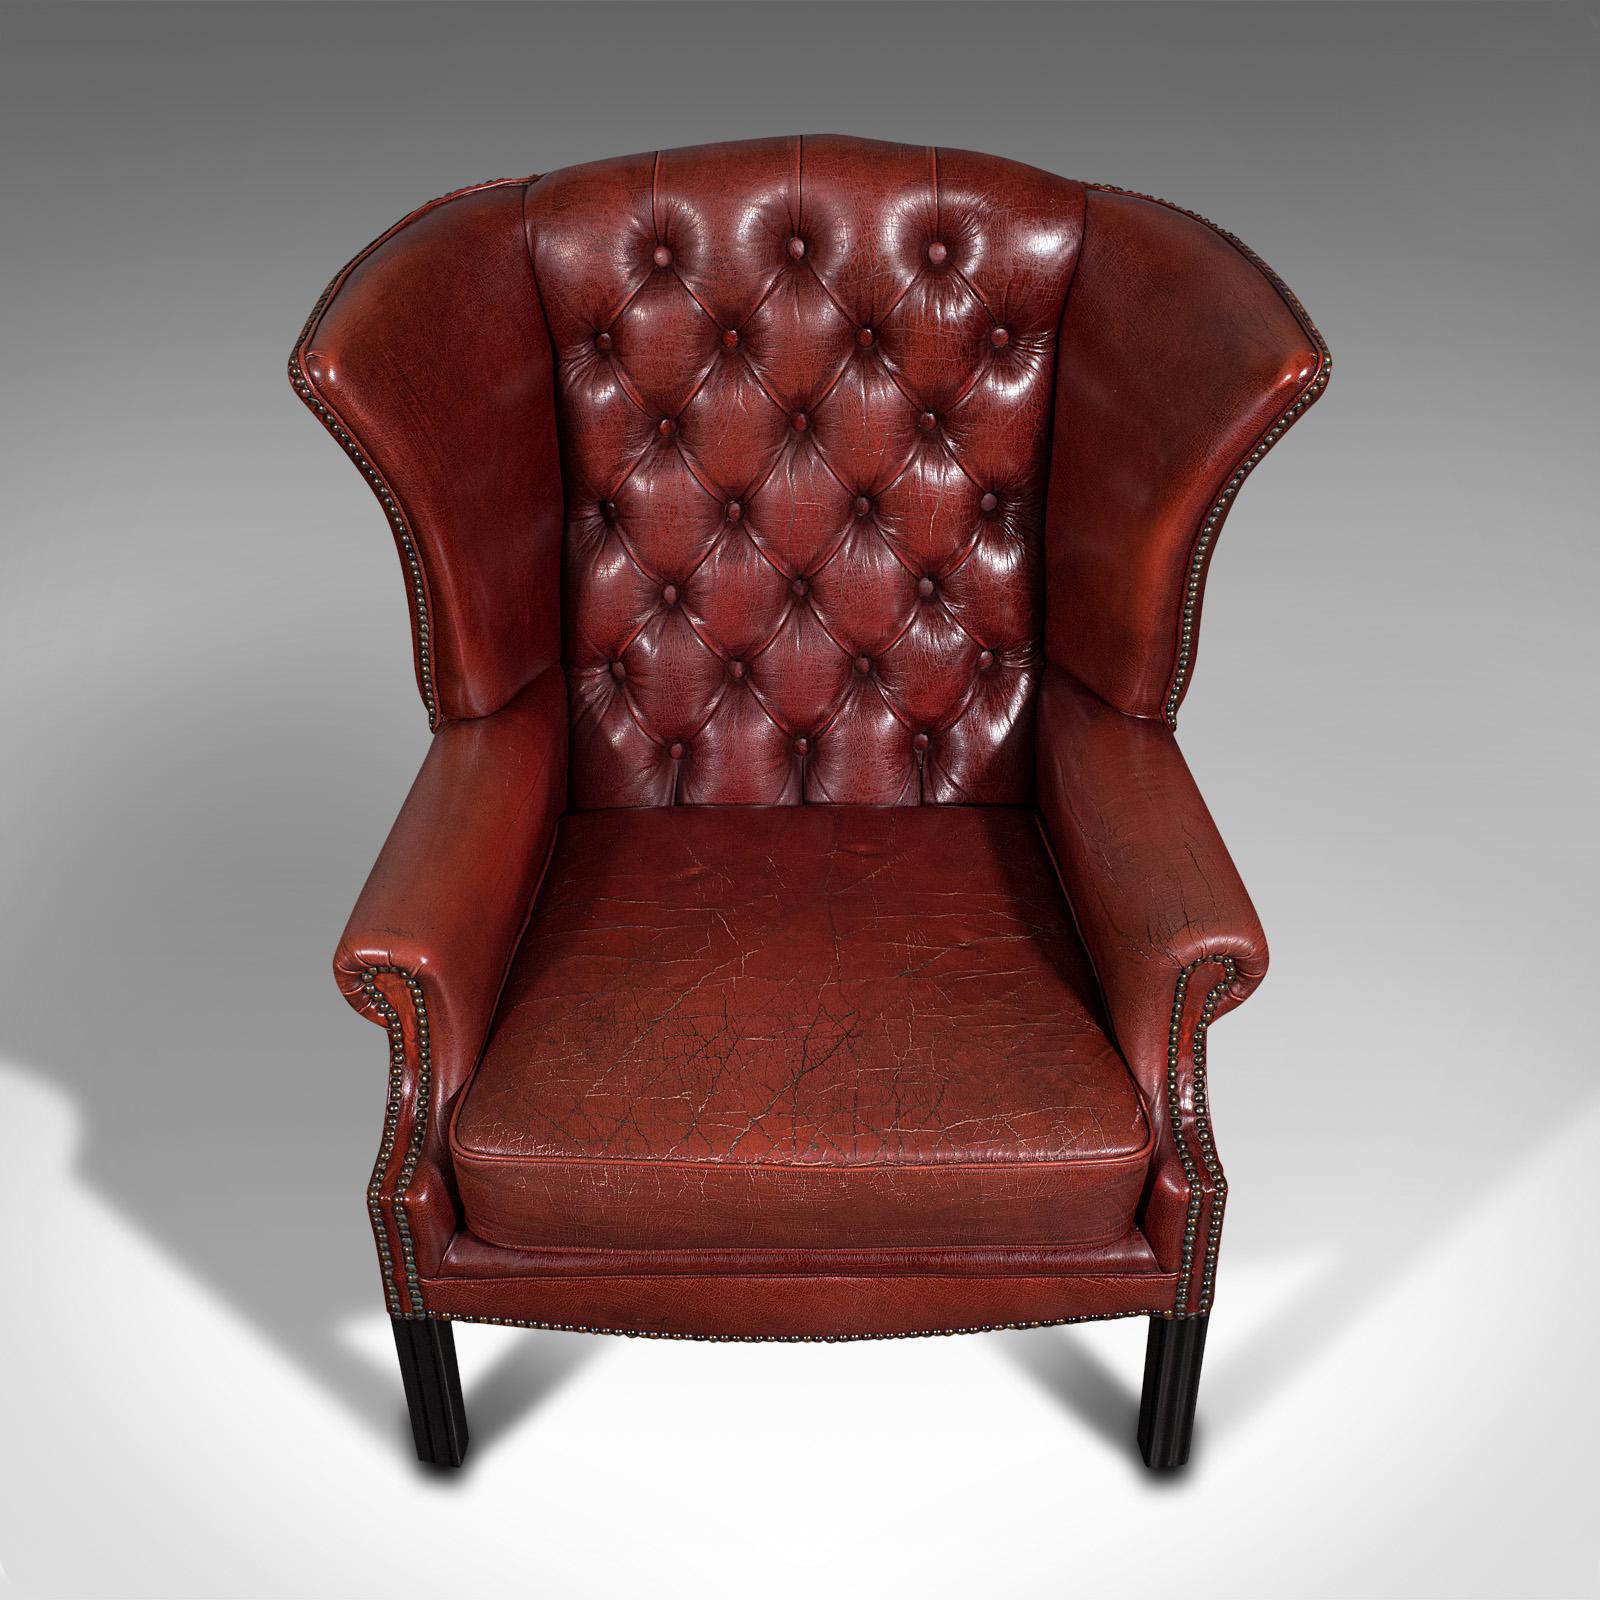 Pair of Vintage Clubhouse Wingback Chairs, English, Leather, Armchair, C.1950 For Sale 1